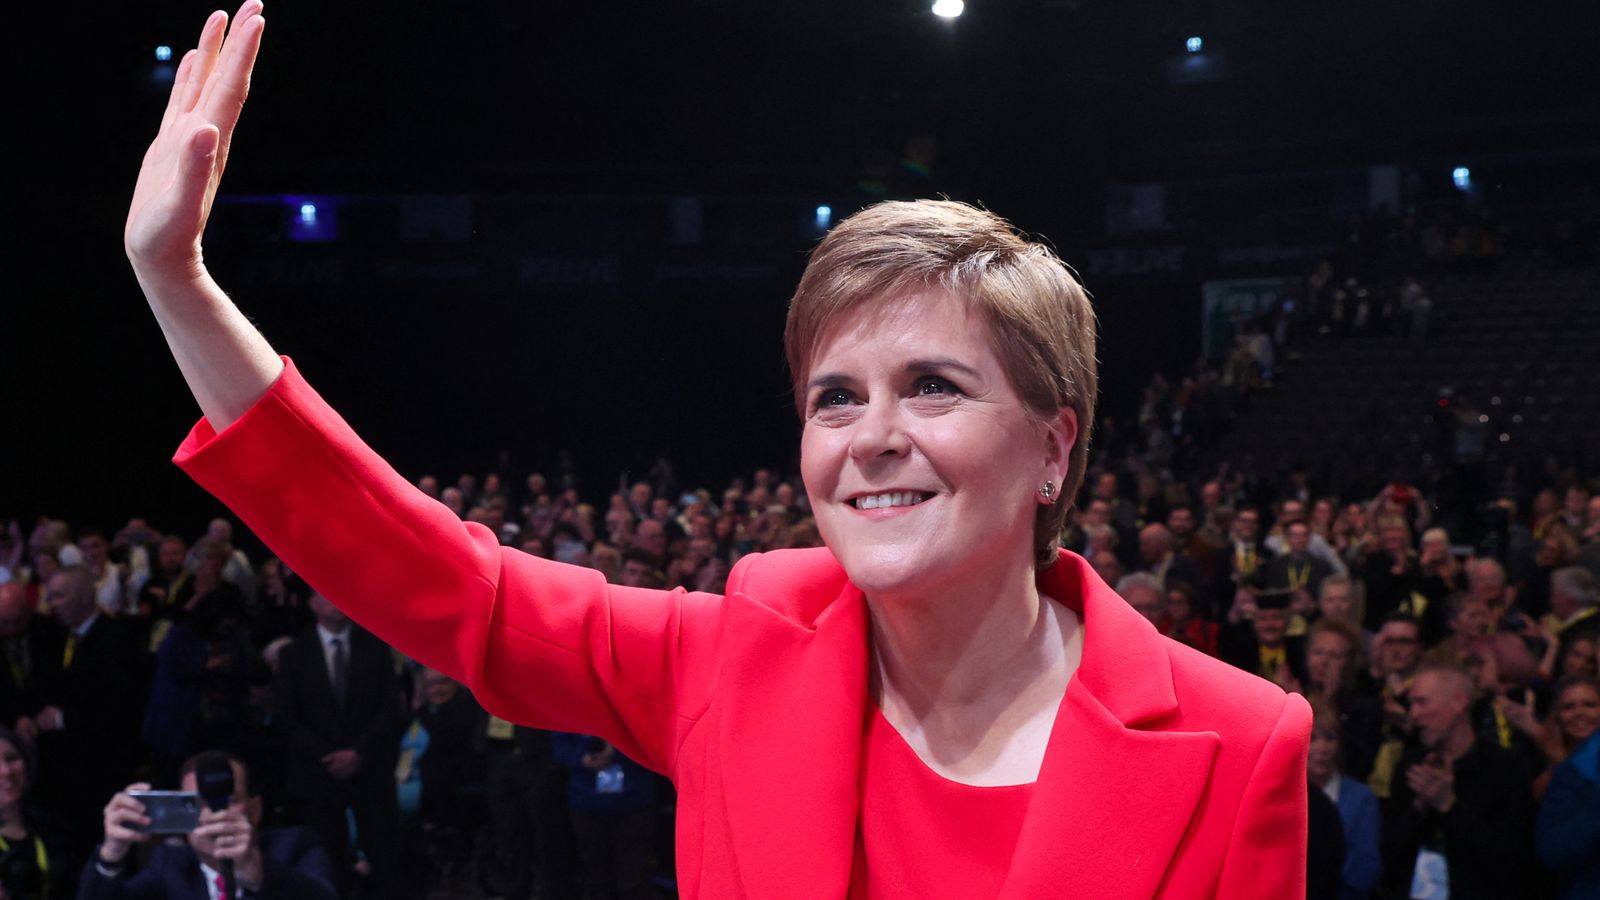 Timeline for SNP leadership race announced - with nominations to close on 24 February